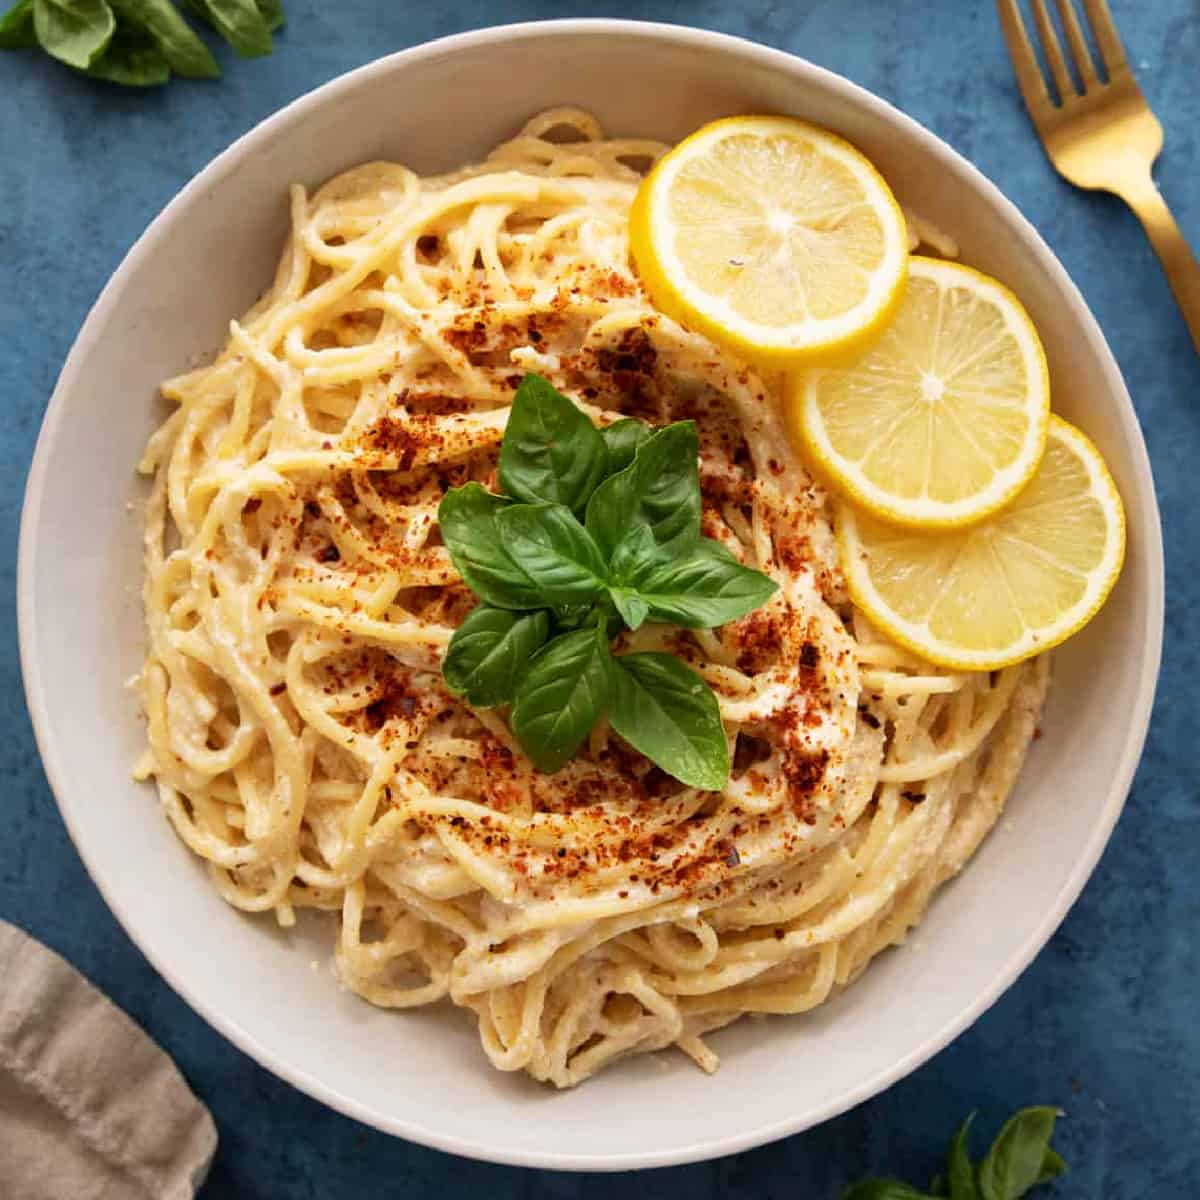 Creamy lemon ricotta pasta is a delicious and easy dish ready in 20 minutes. Fresh lemon and rich ricotta make this pasta extra special.
